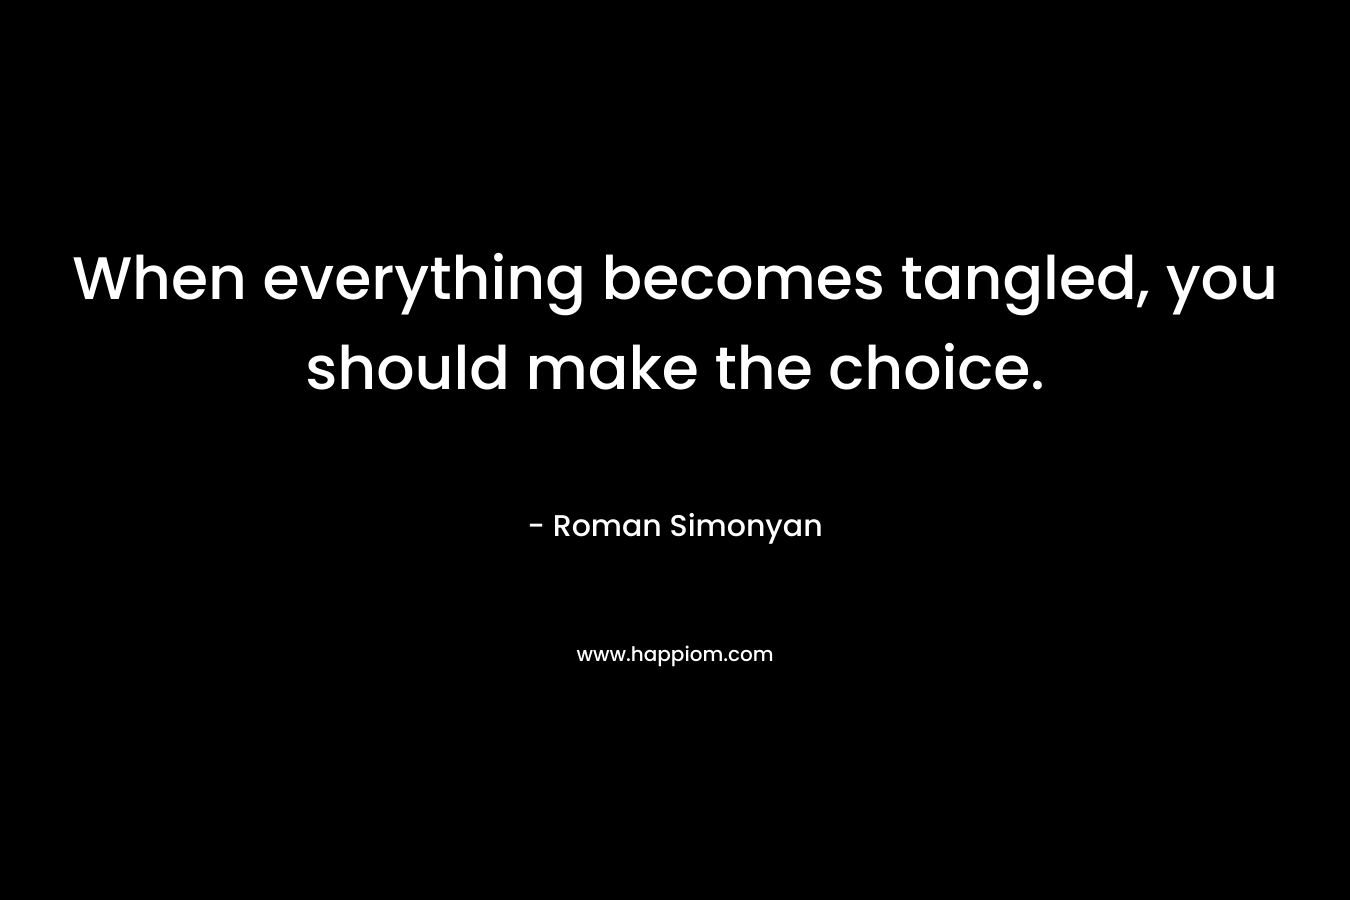 When everything becomes tangled, you should make the choice.